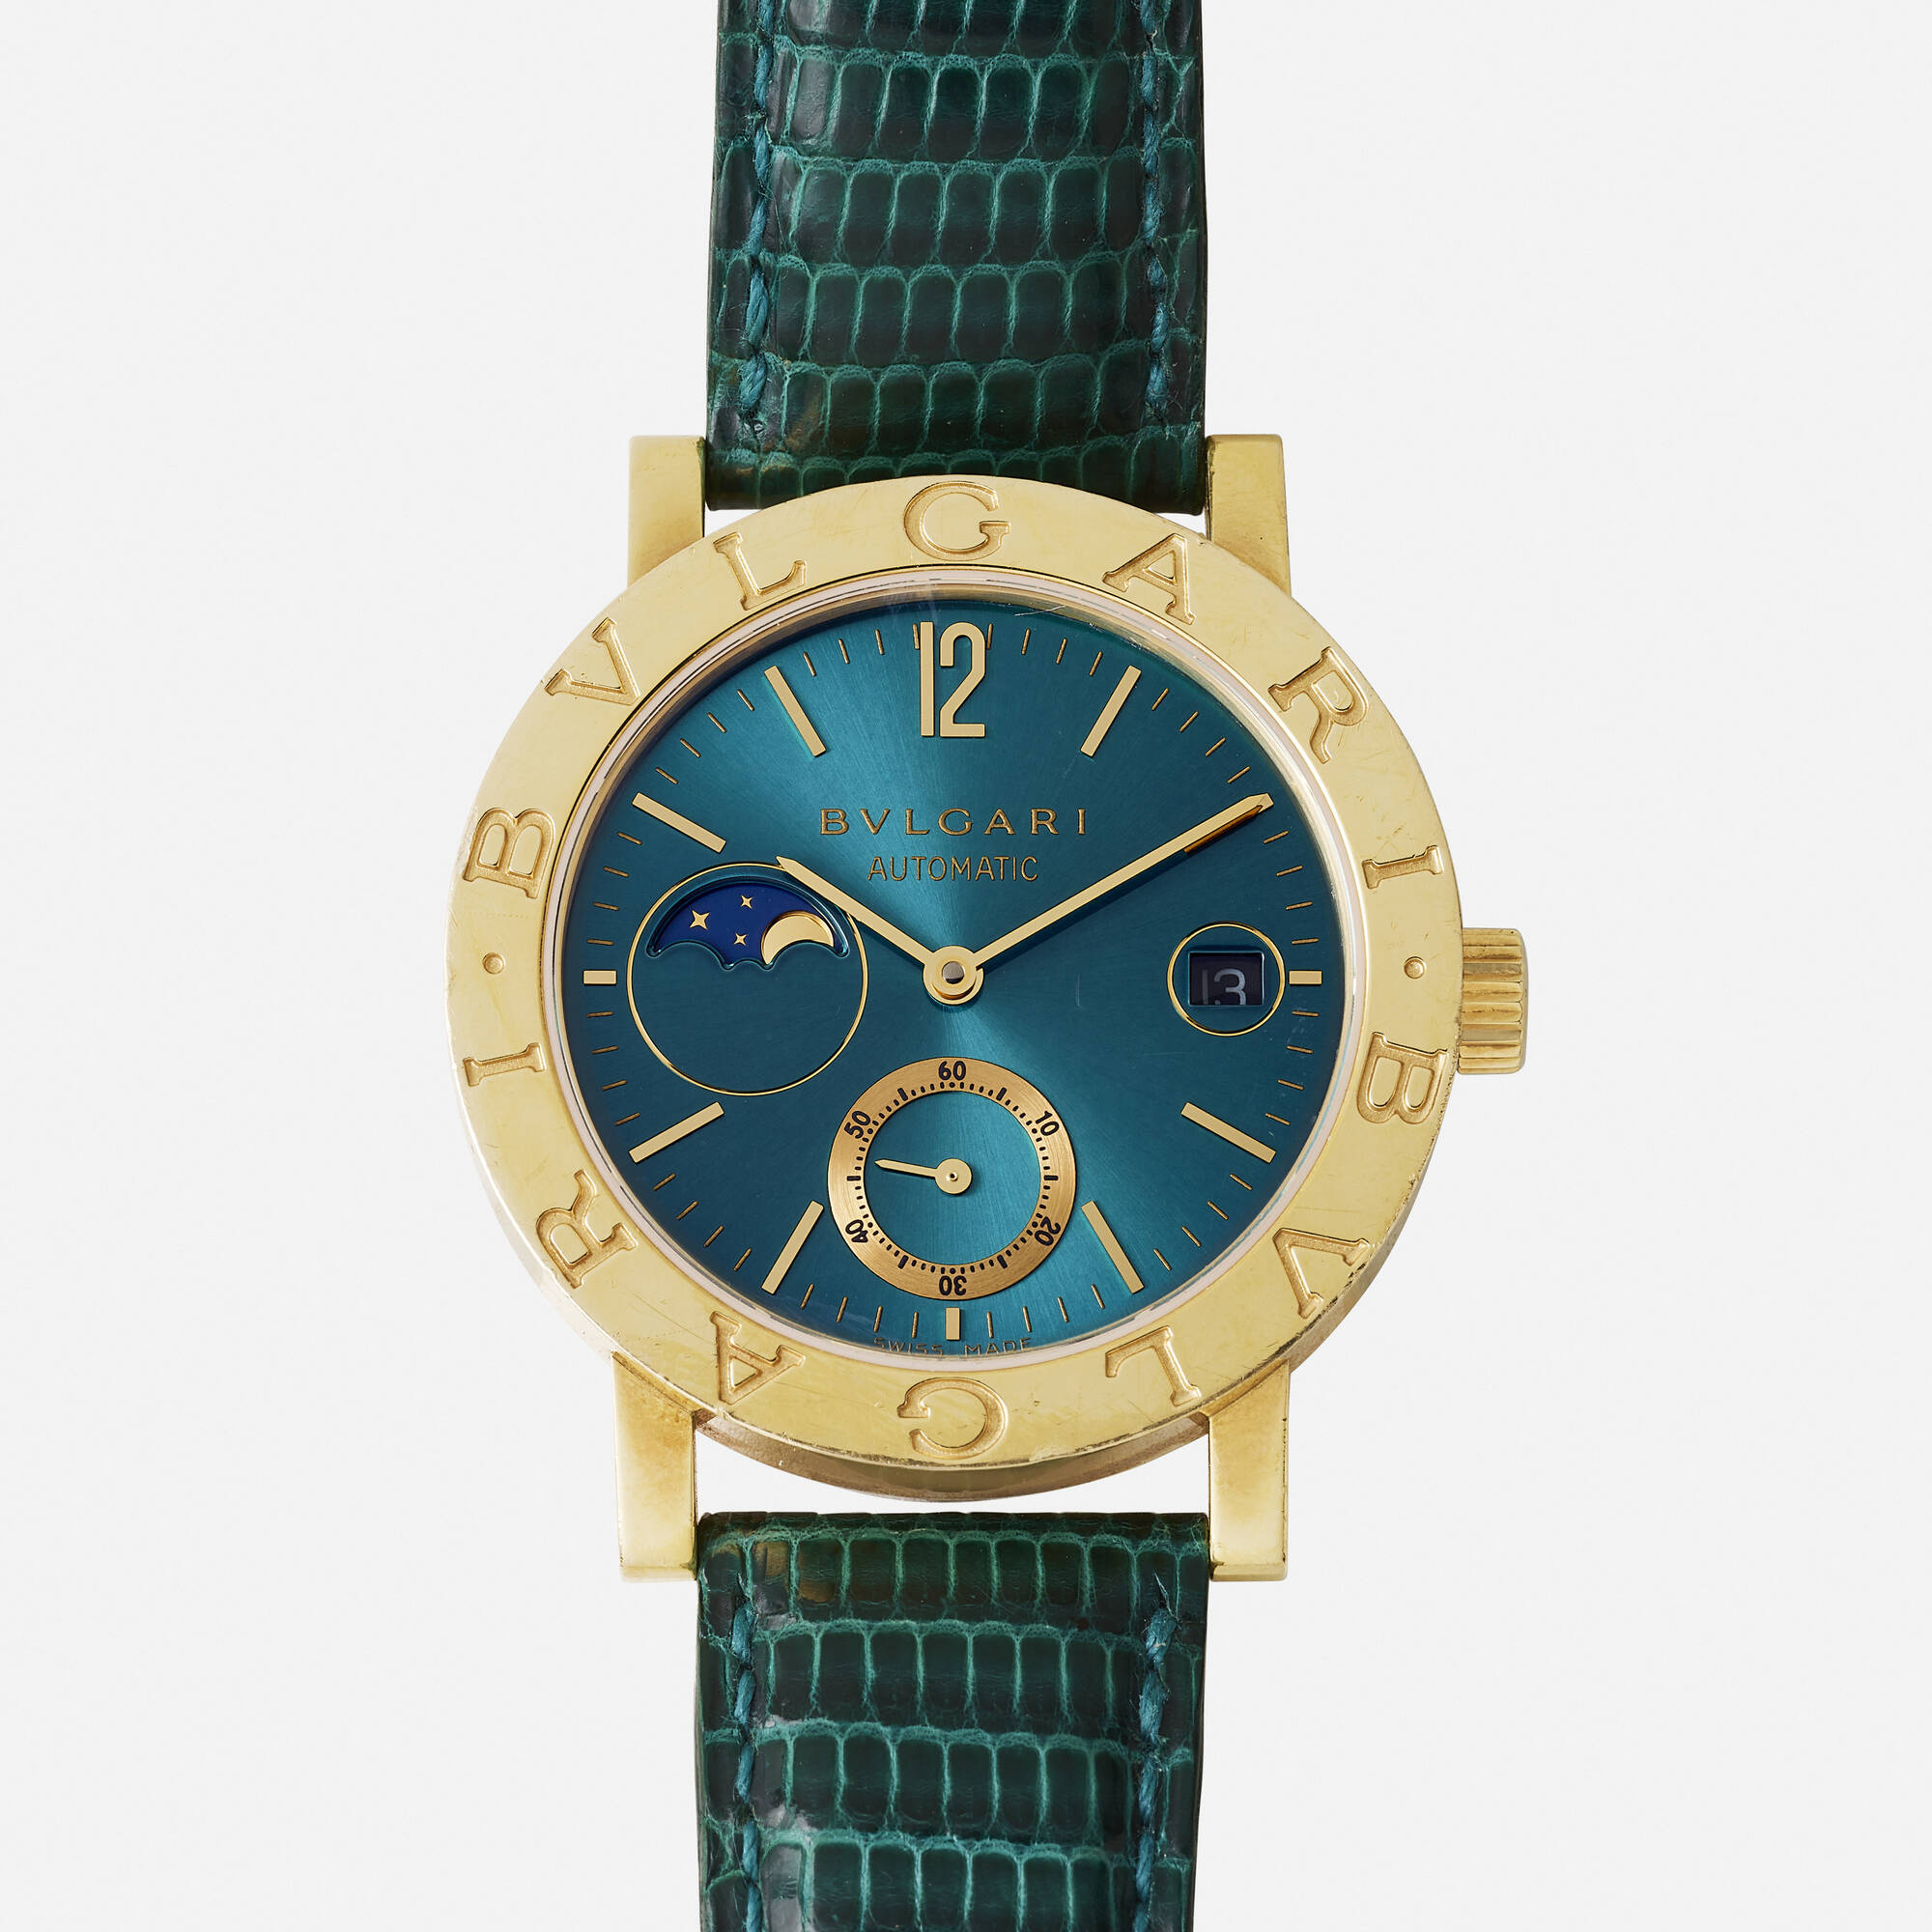 125: BULGARI, 'Bulgari Limited Edition' gold wristwatch, Ref. BB38GLMP <  Watches, 26 October 2022 < Auctions | Rago Auctions